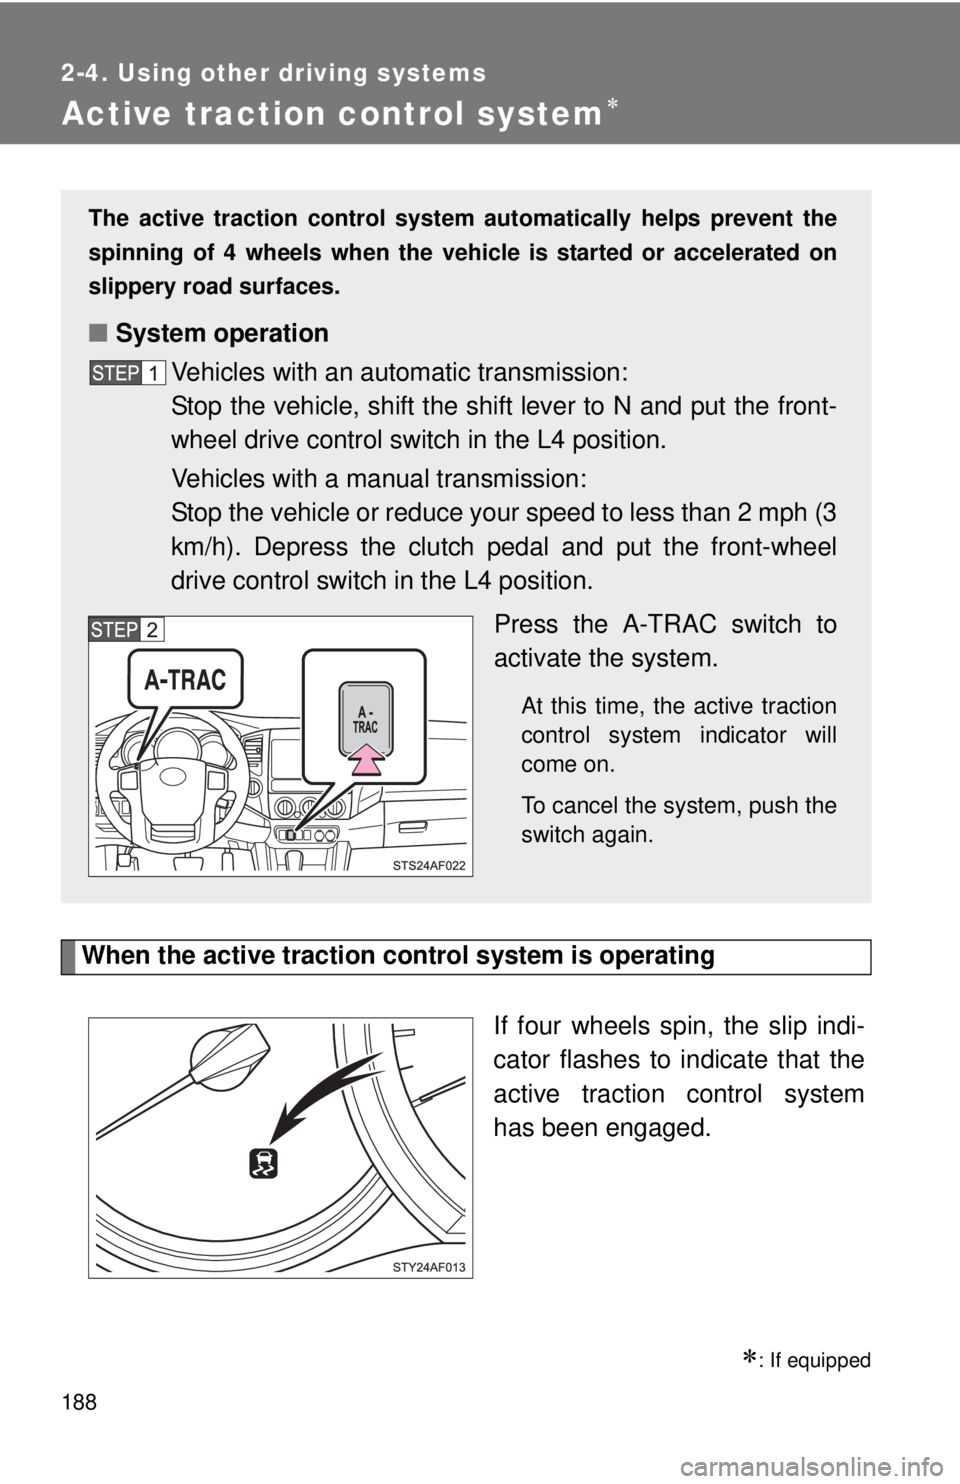 TOYOTA TACOMA 2013  Owners Manual (in English) 188
2-4. Using other driving systems
Active traction control system
When the active traction control system is operatingIf four wheels spin, the slip indi-
cator flashes to indicate that the
active